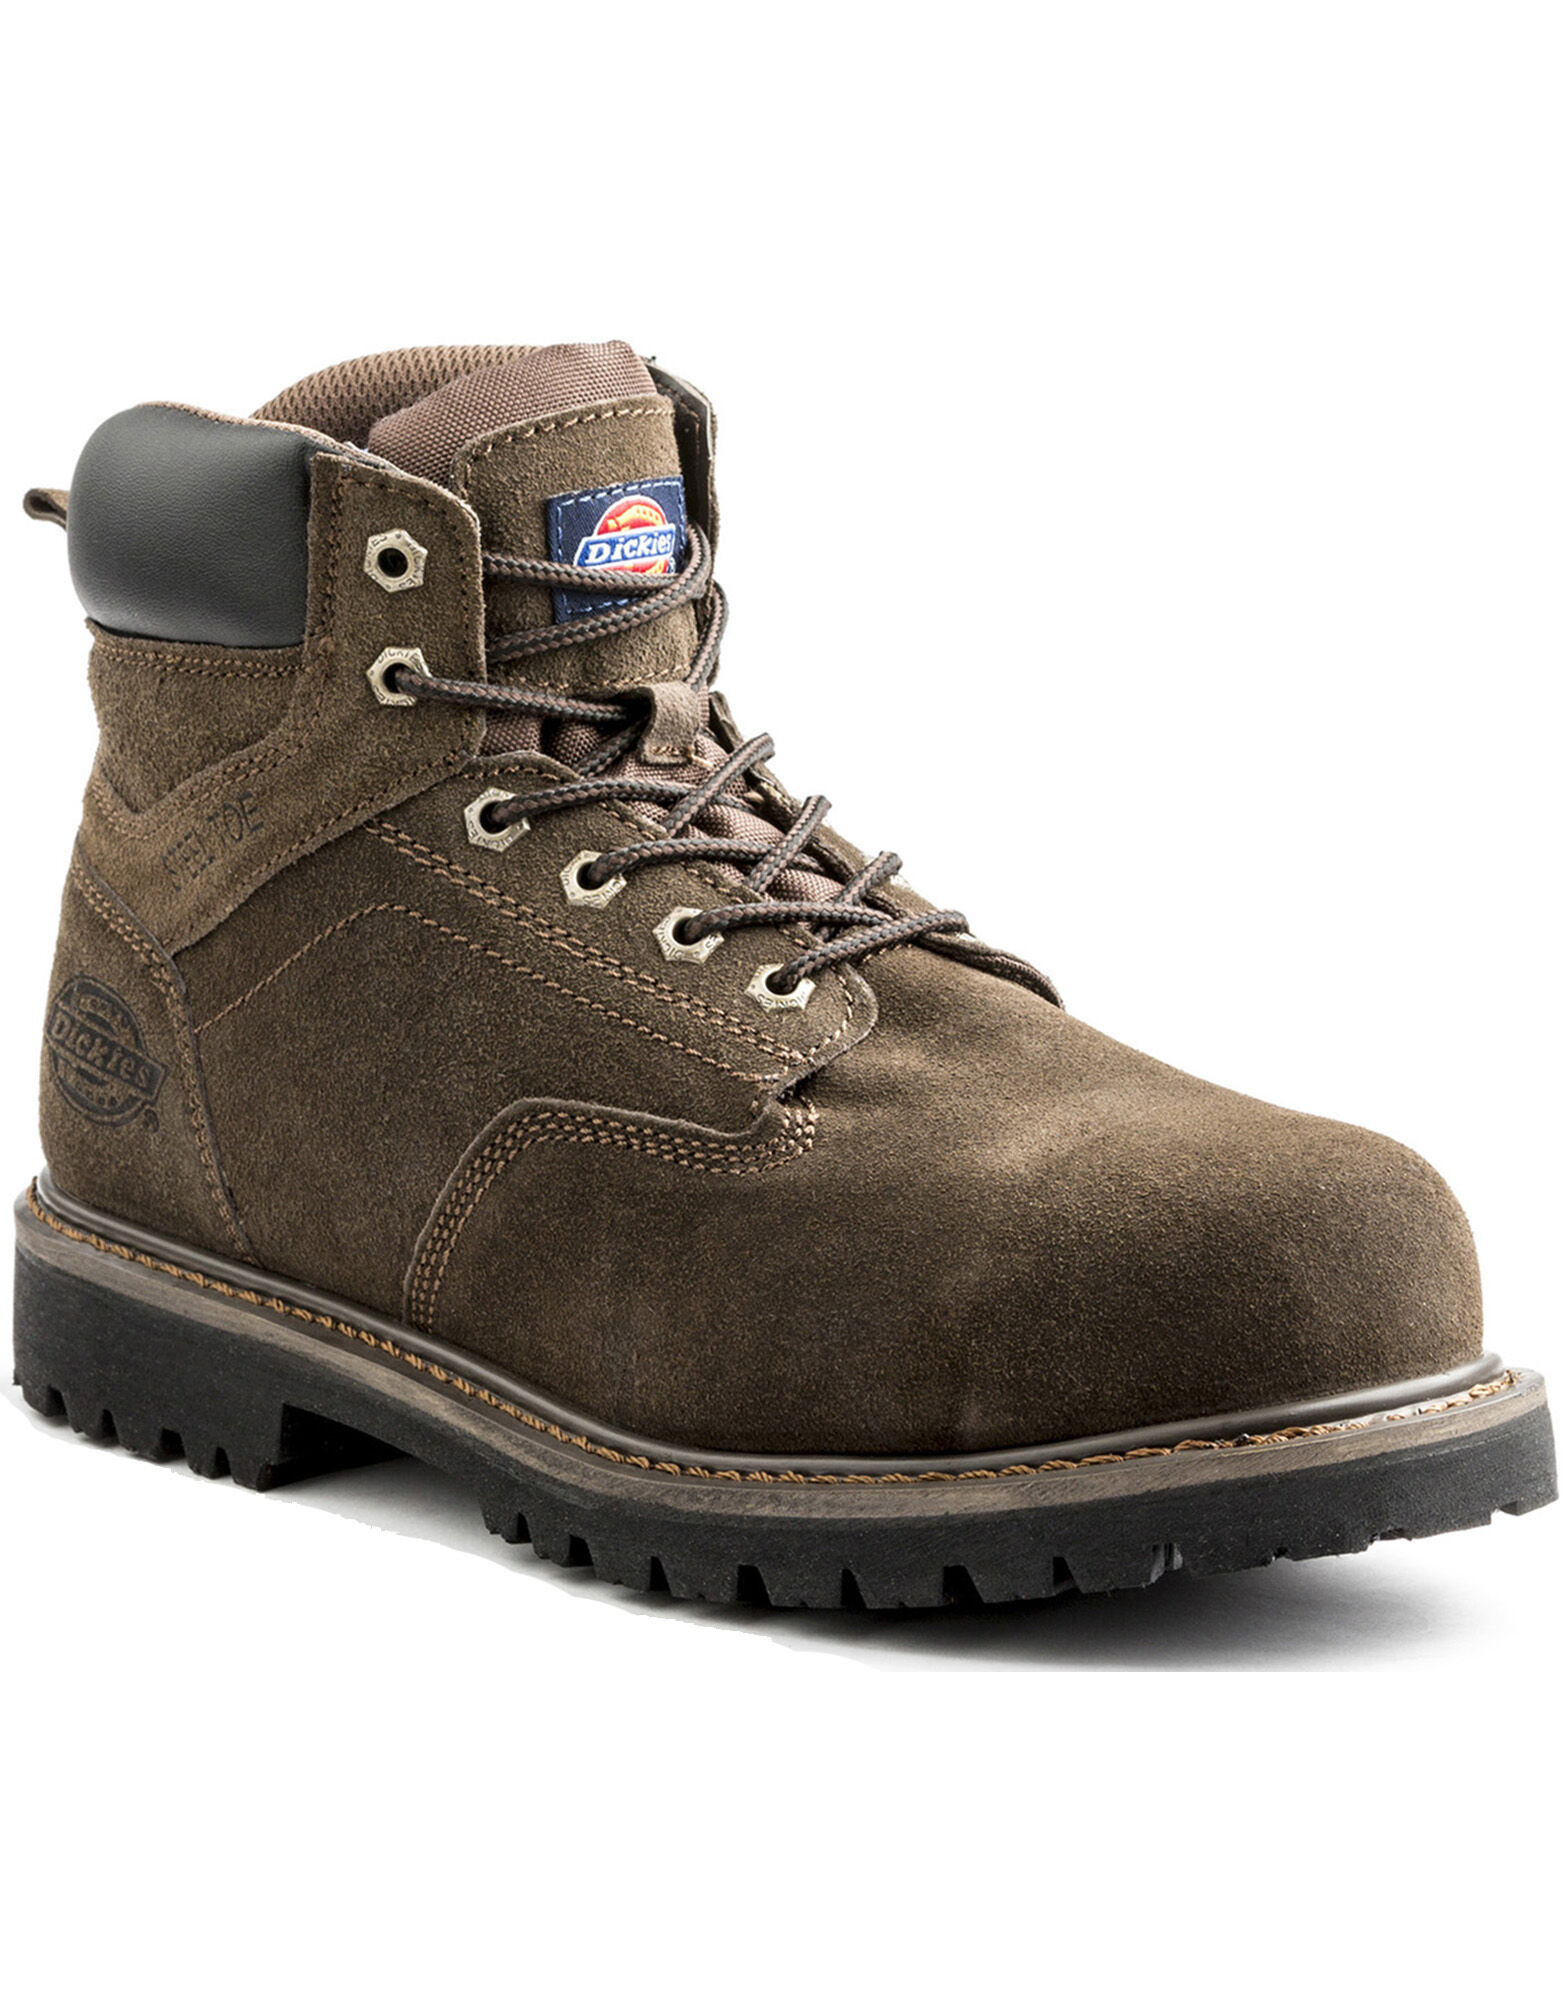 composite toe boots red wing